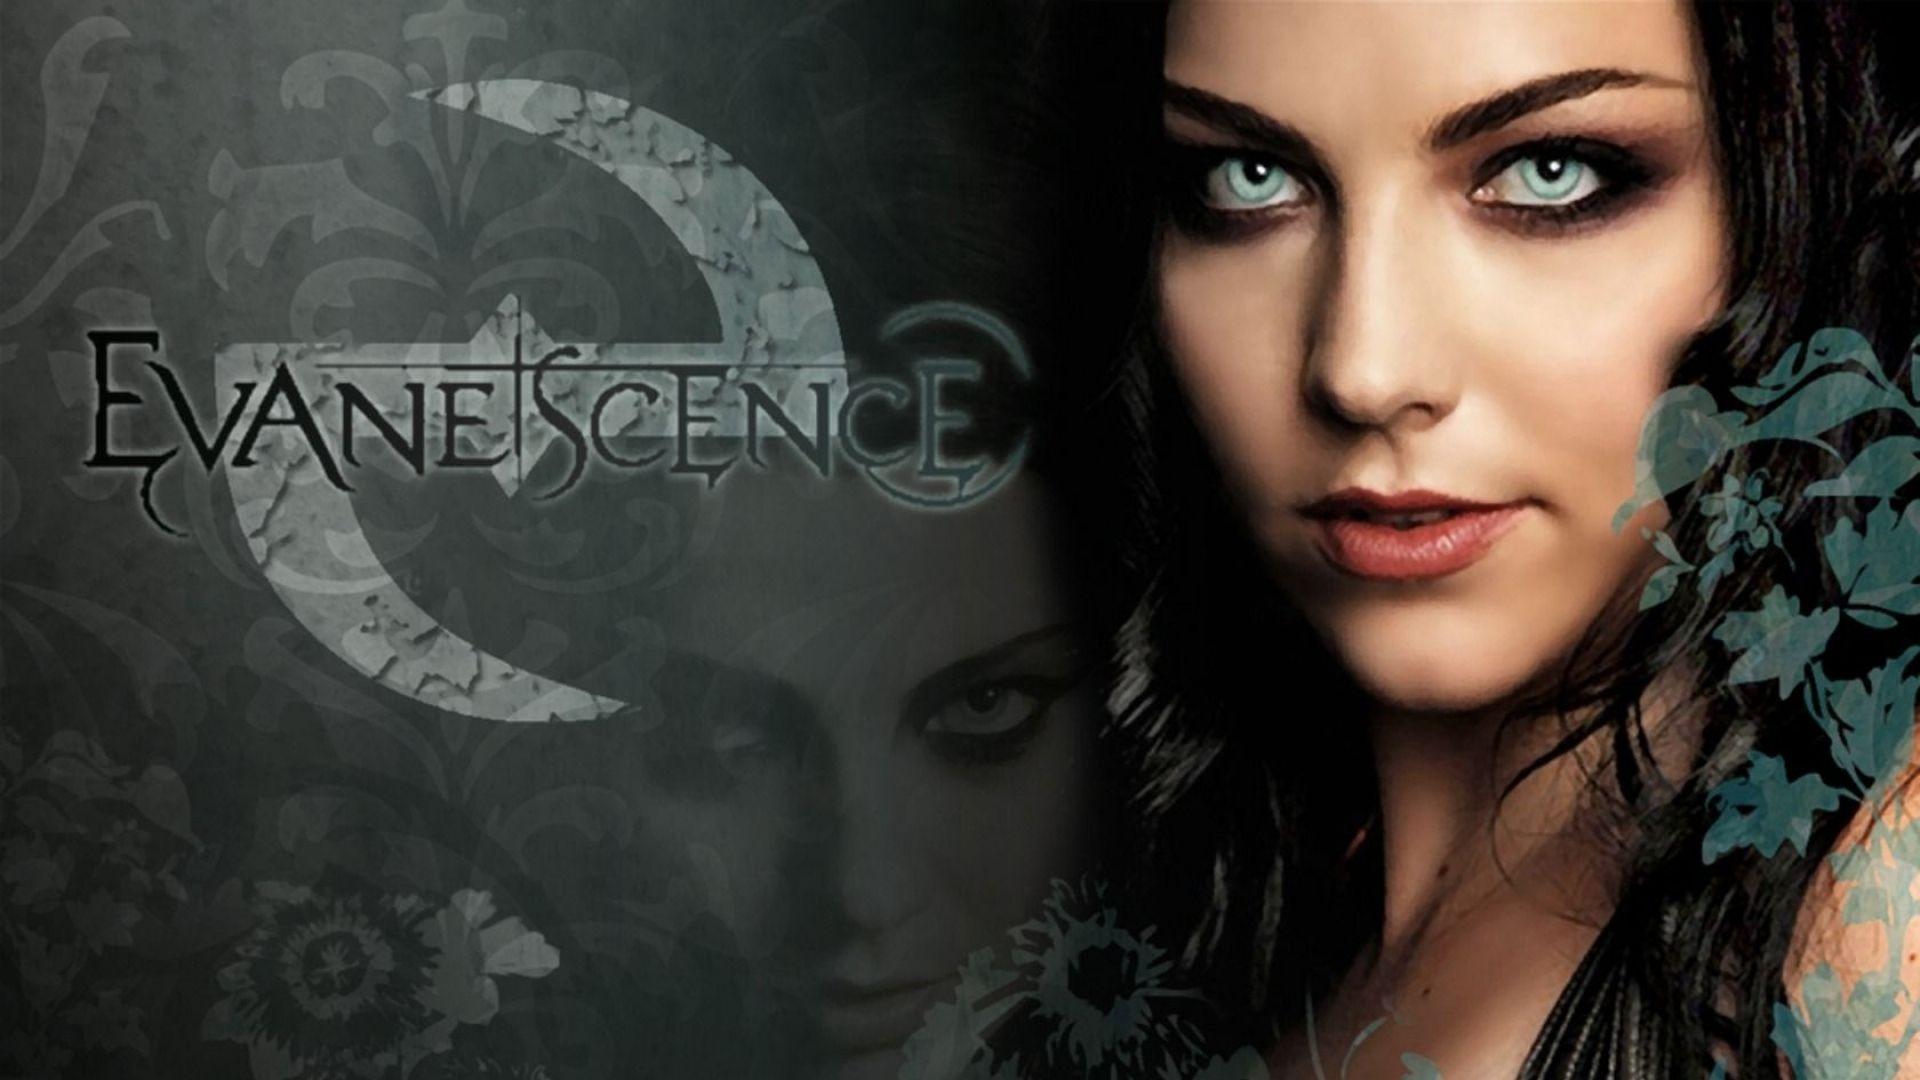 Wallpaper.wiki HD Evanescence Image 1920x1080 PIC WPB006141